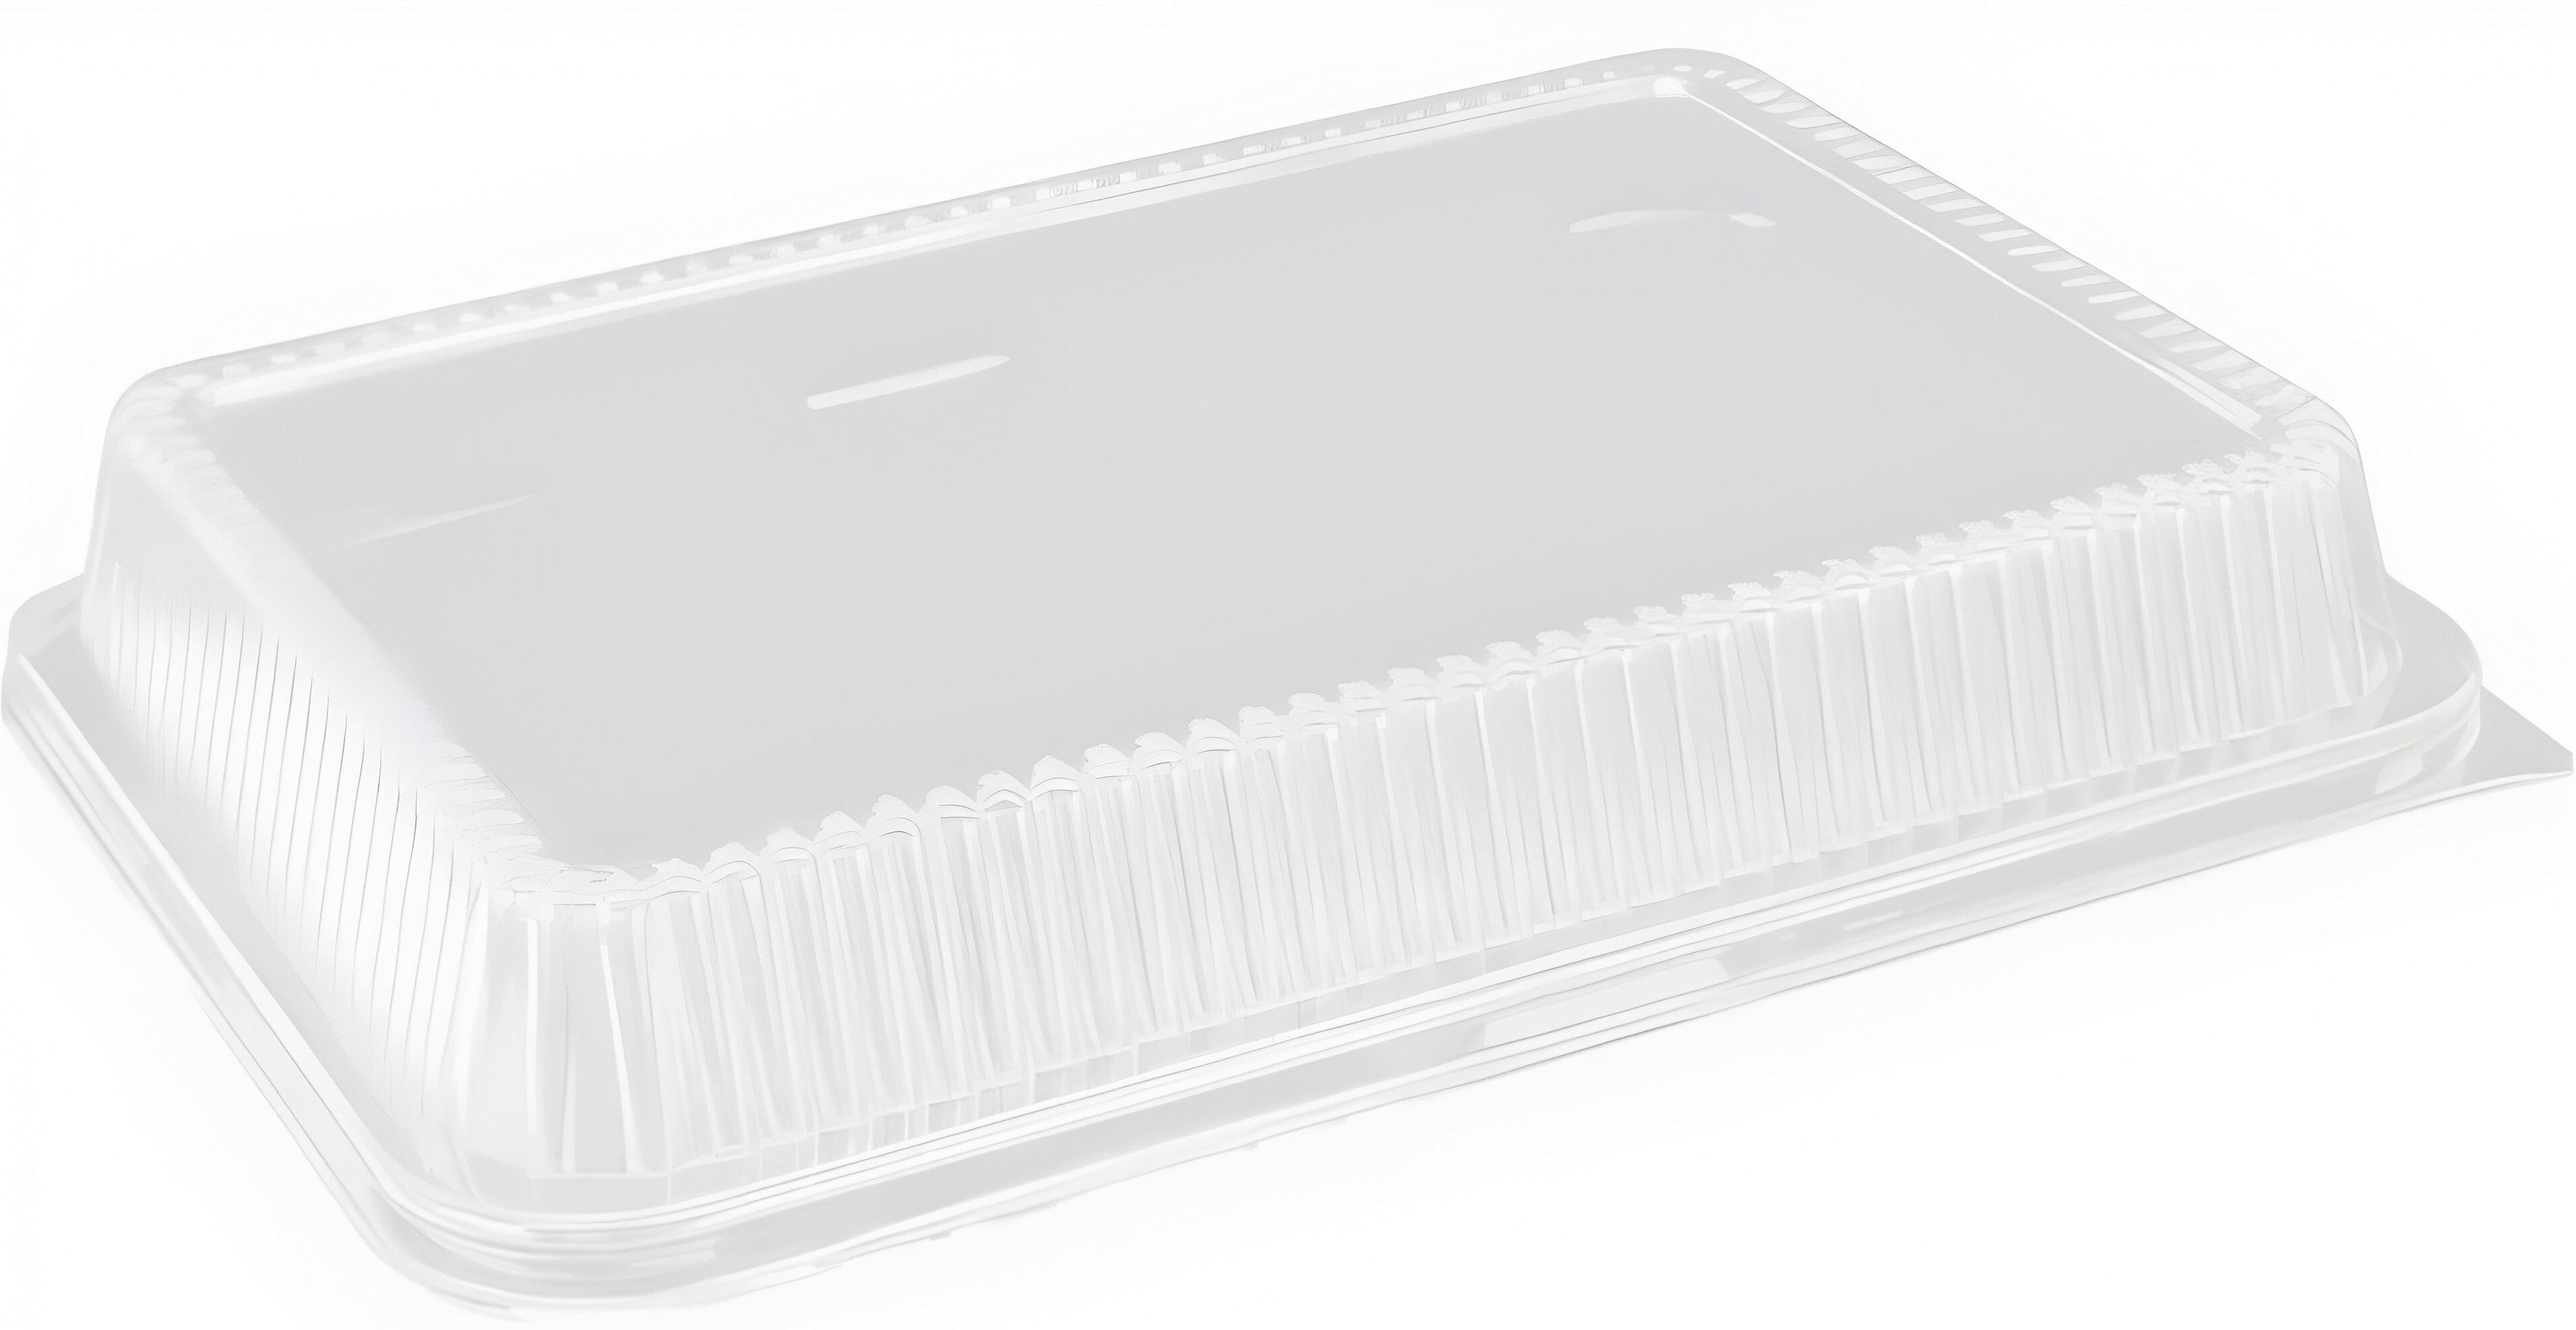 HFA - Plastic Dome Lid For 2045, 4045 Plastic Containers, 500/Cs - 4045DL-500